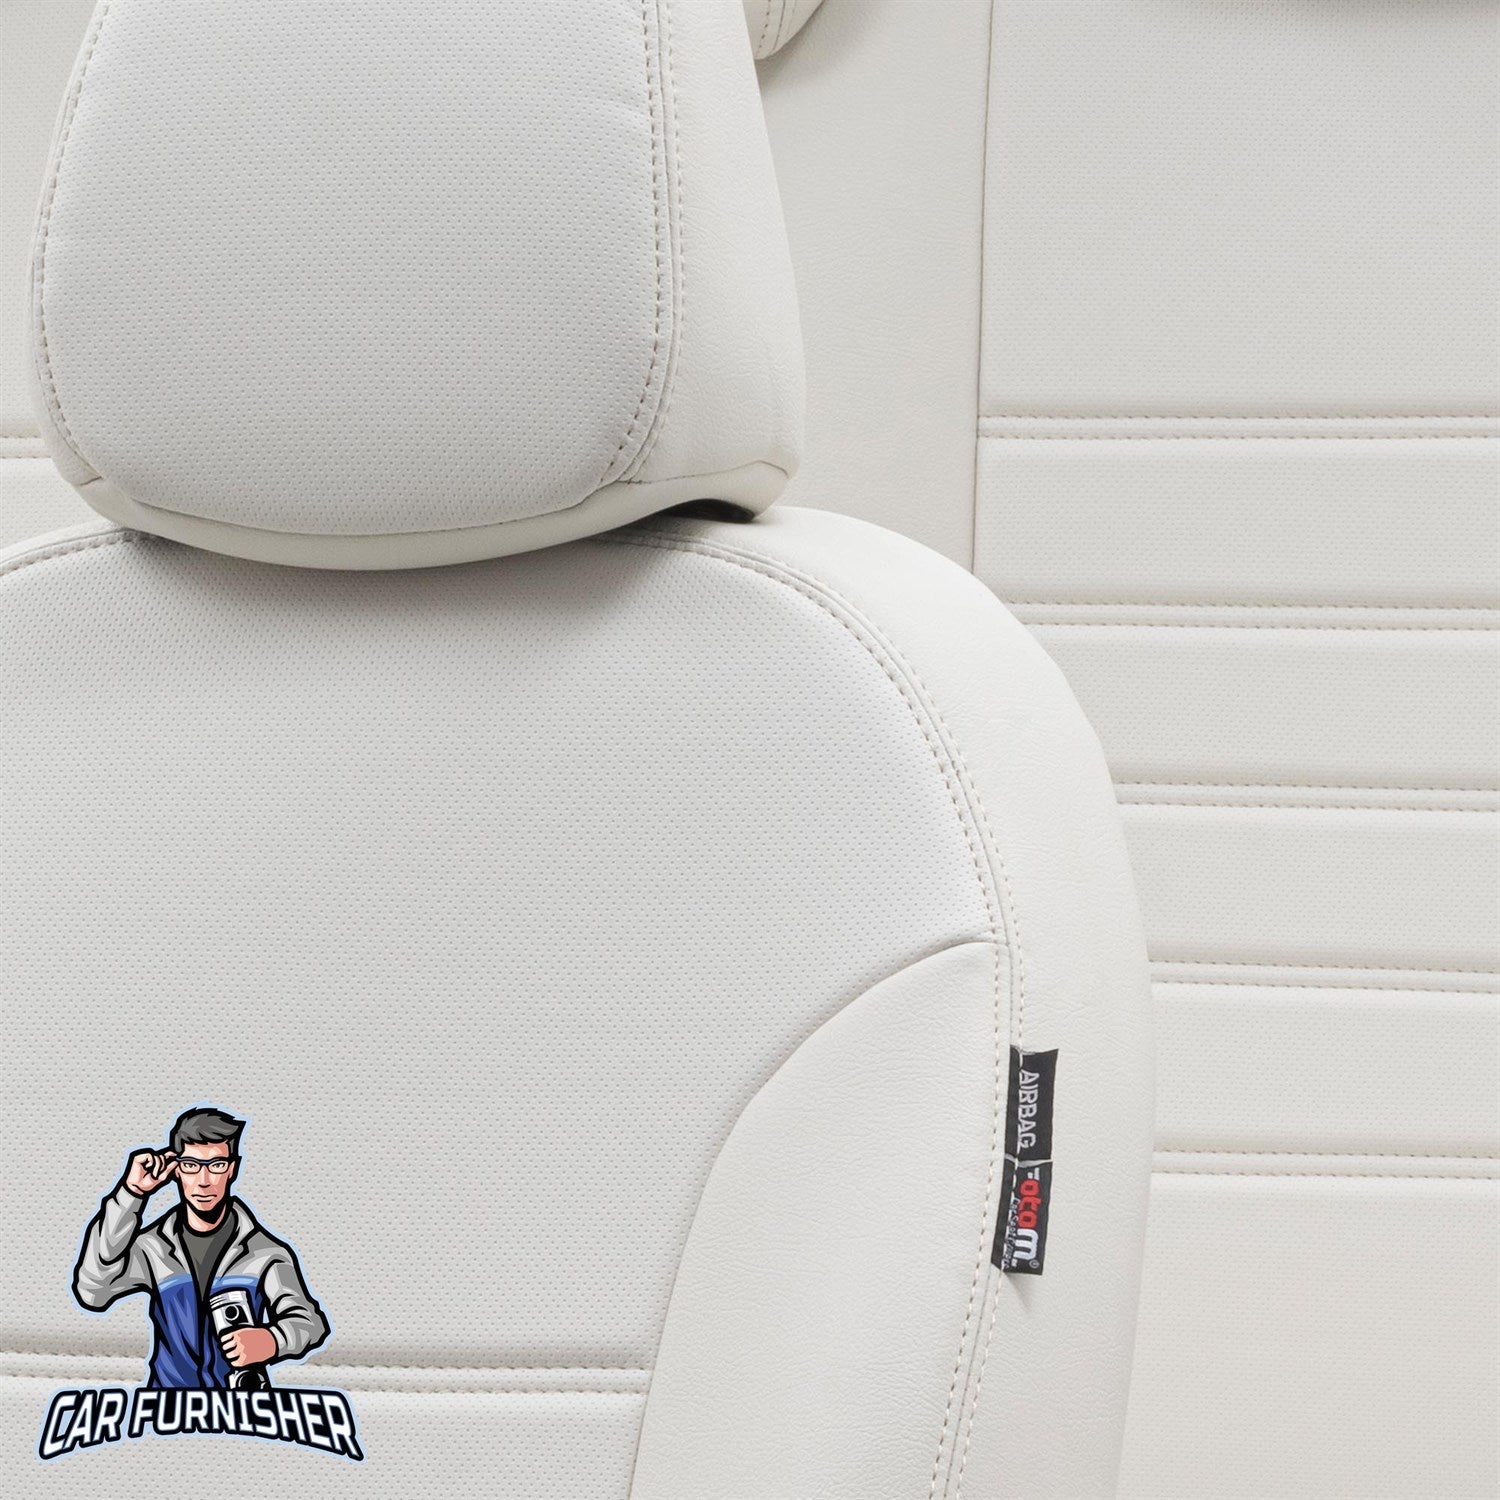 Volvo S60 Car Seat Cover 2000-2018 T4/T5/T6/T8/D5 Istanbul Design Ivory Full Set (5 Seats + Handrest) Leather & Fabric